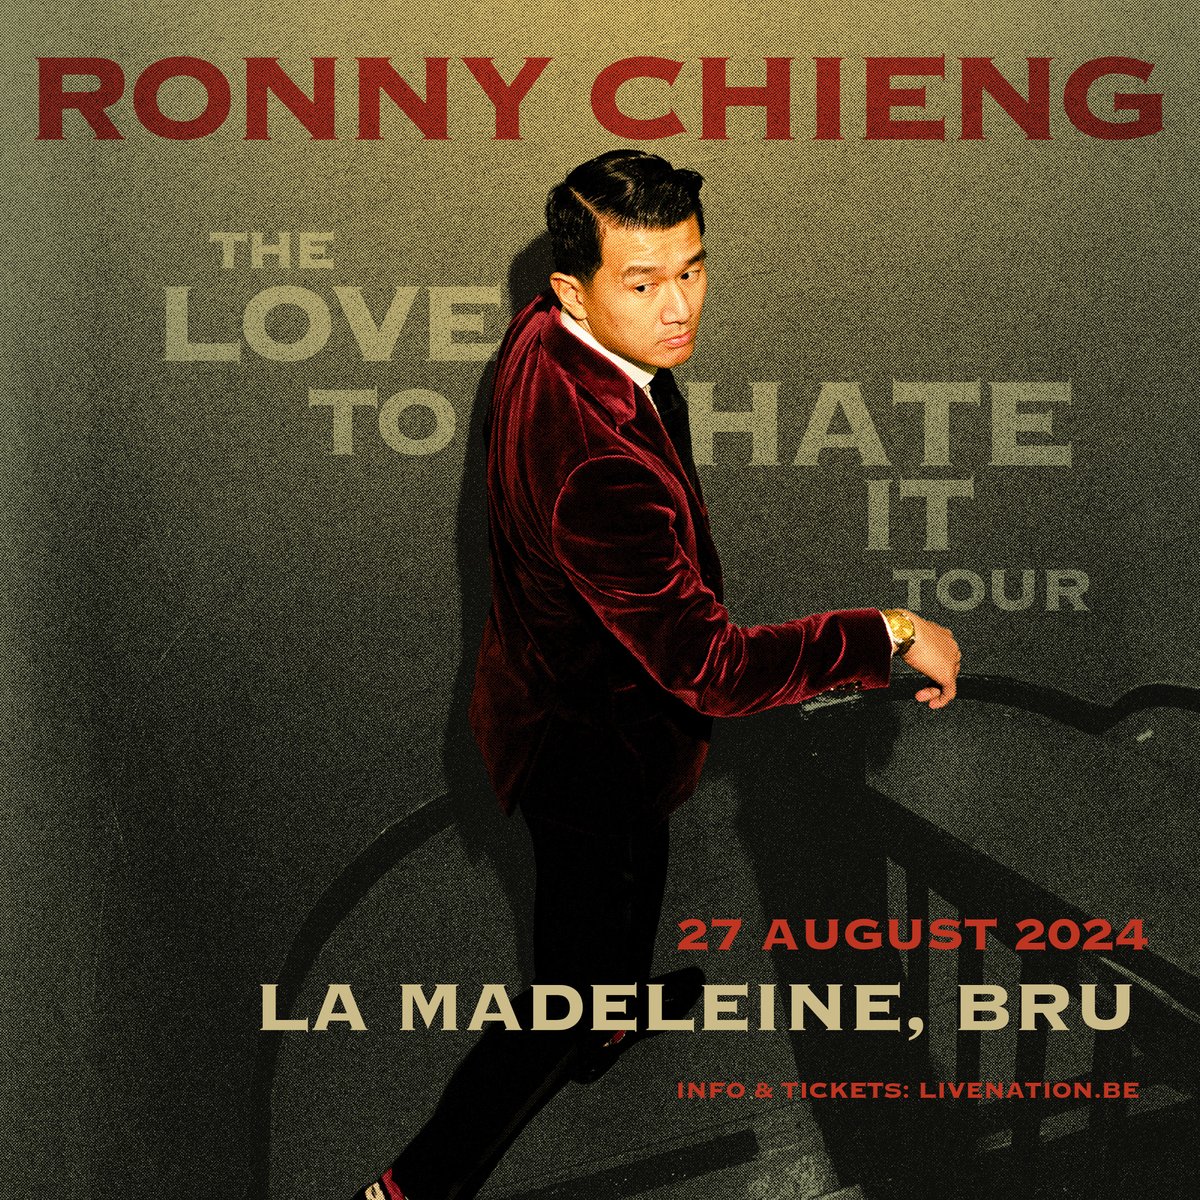 #NEWSHOW: @RonnyChieng is one of today's most interesting English-language comedians. His brand new 'The Love To Hate It Tour' is coming to Brussels this summer, for a show at La Madeleine on 27 August! 🎭 🎫 Tickets available from Friday, 10 AM: bit.ly/3QztBQW